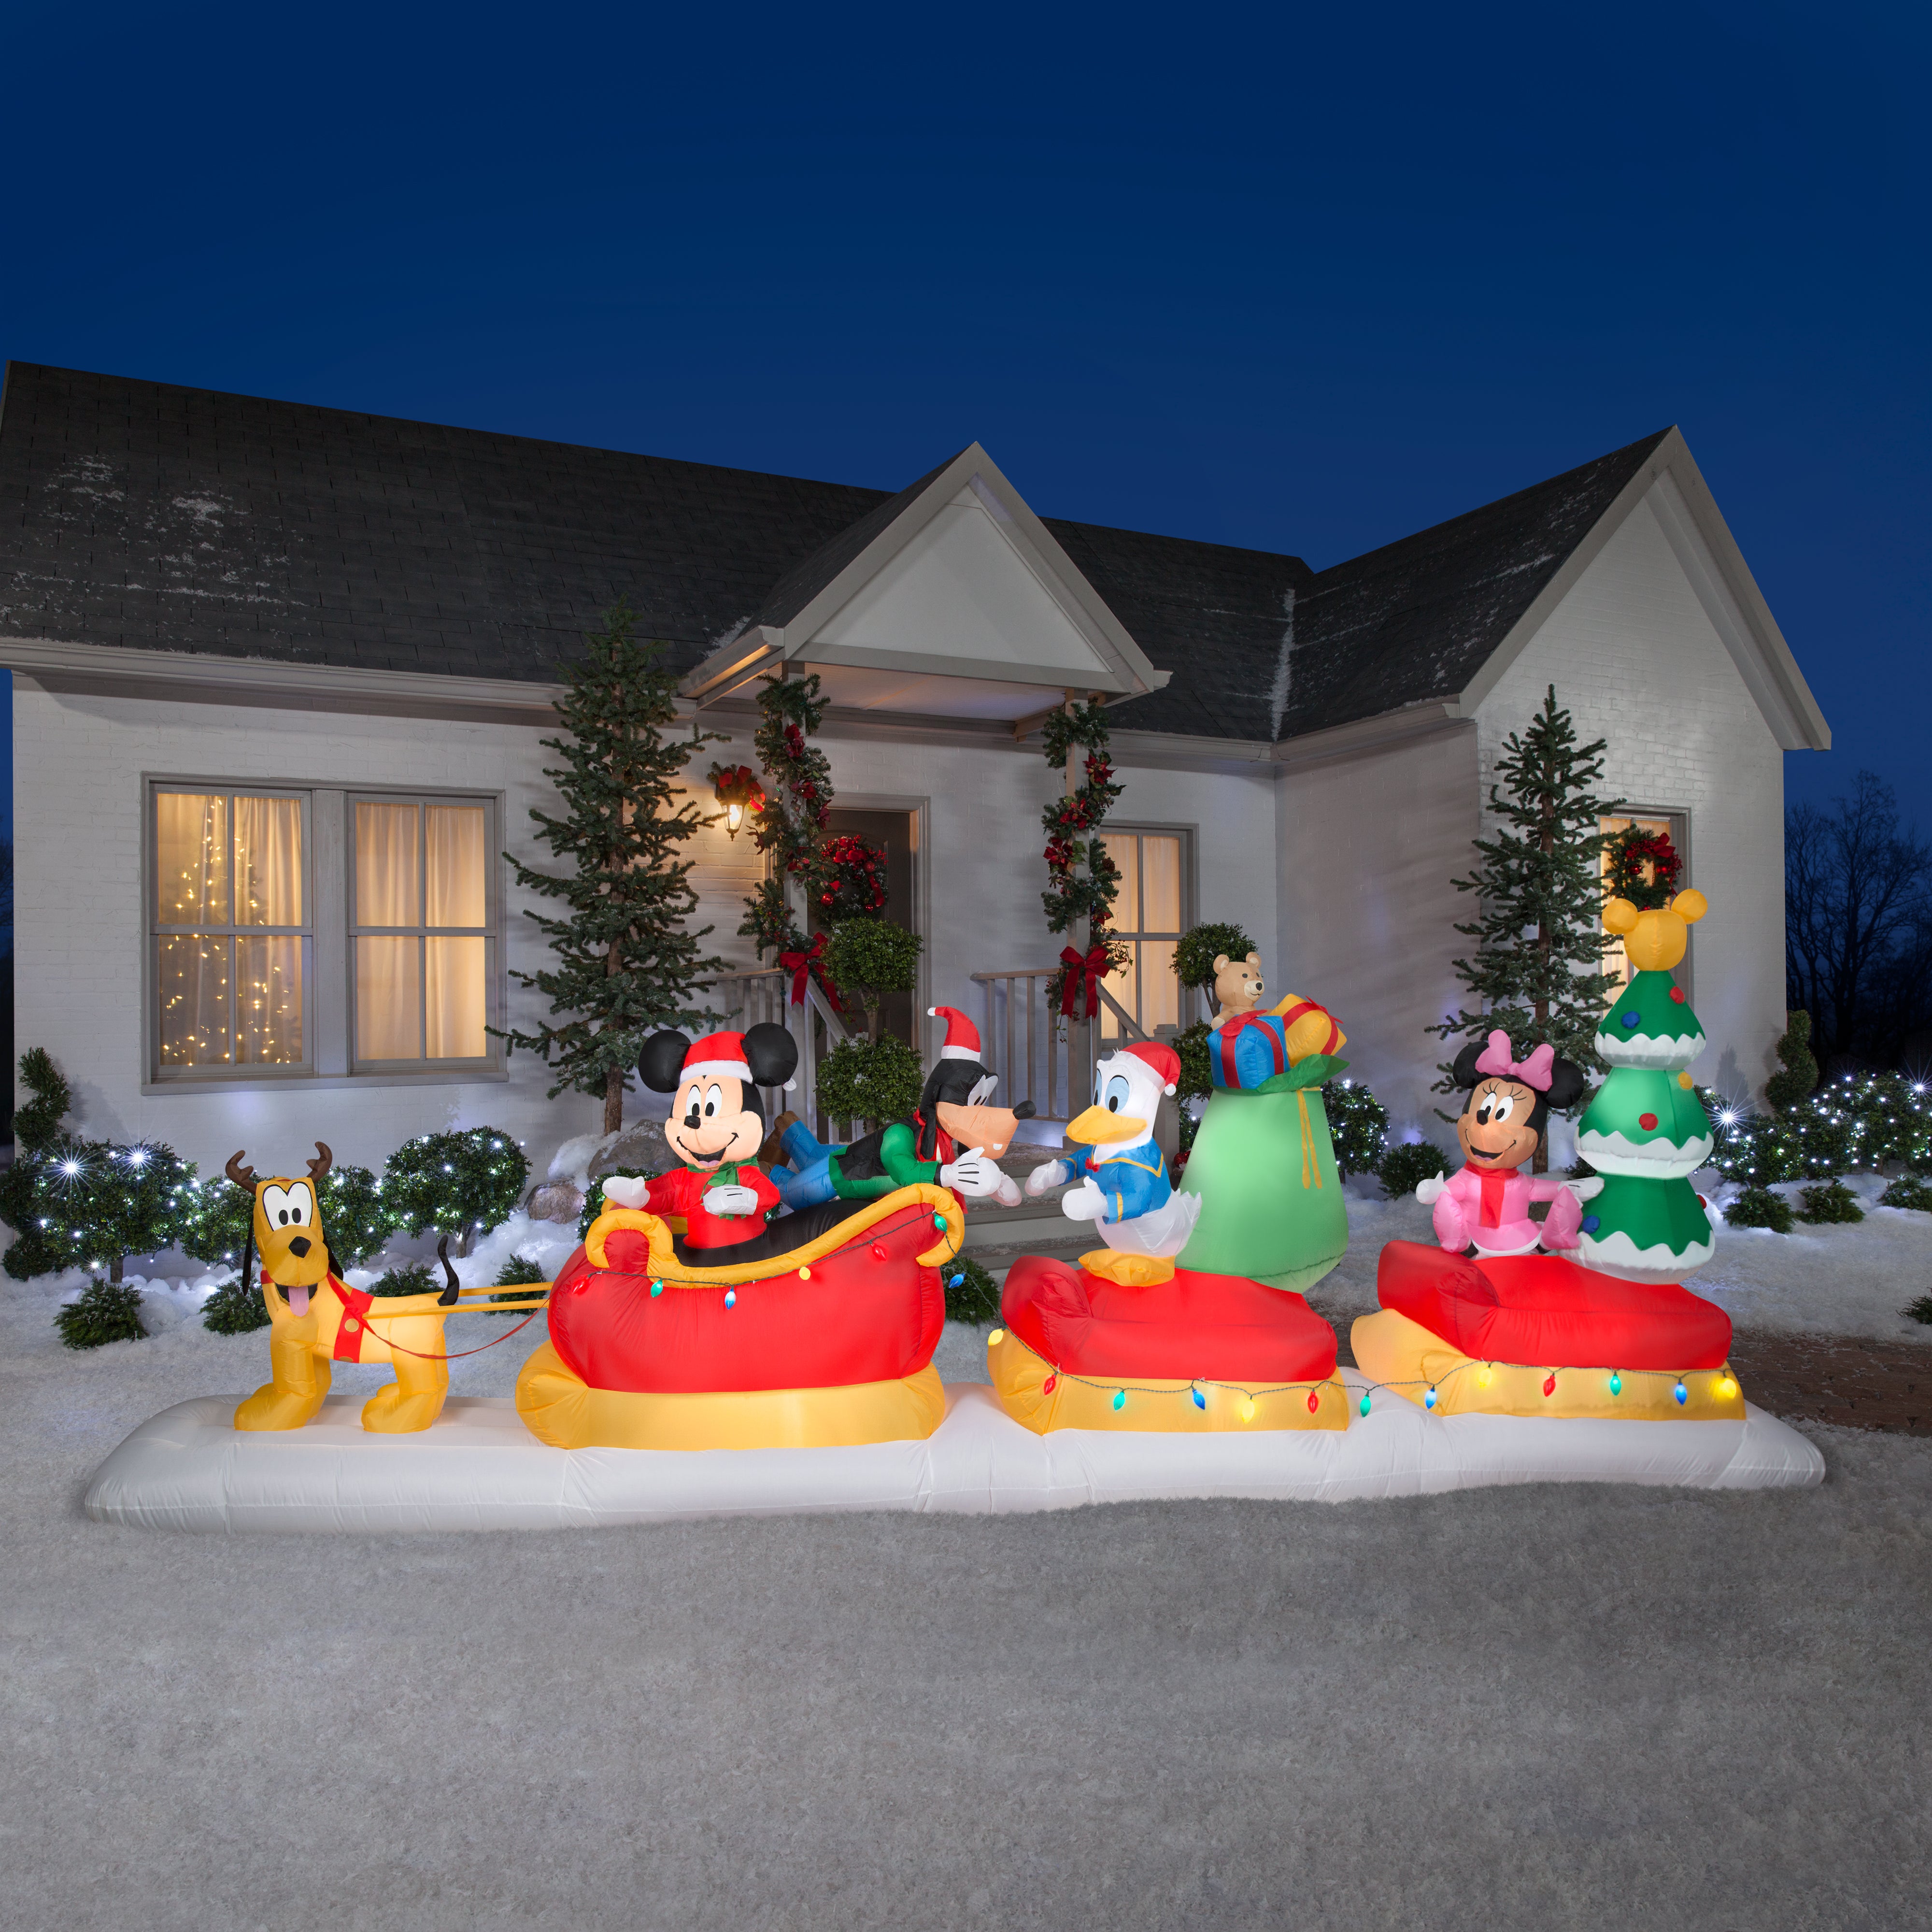 Gemmy Animated Christmas Airblown Inflatable Mickey and Friends Sleigh Scene Disney, 6 ft Tall